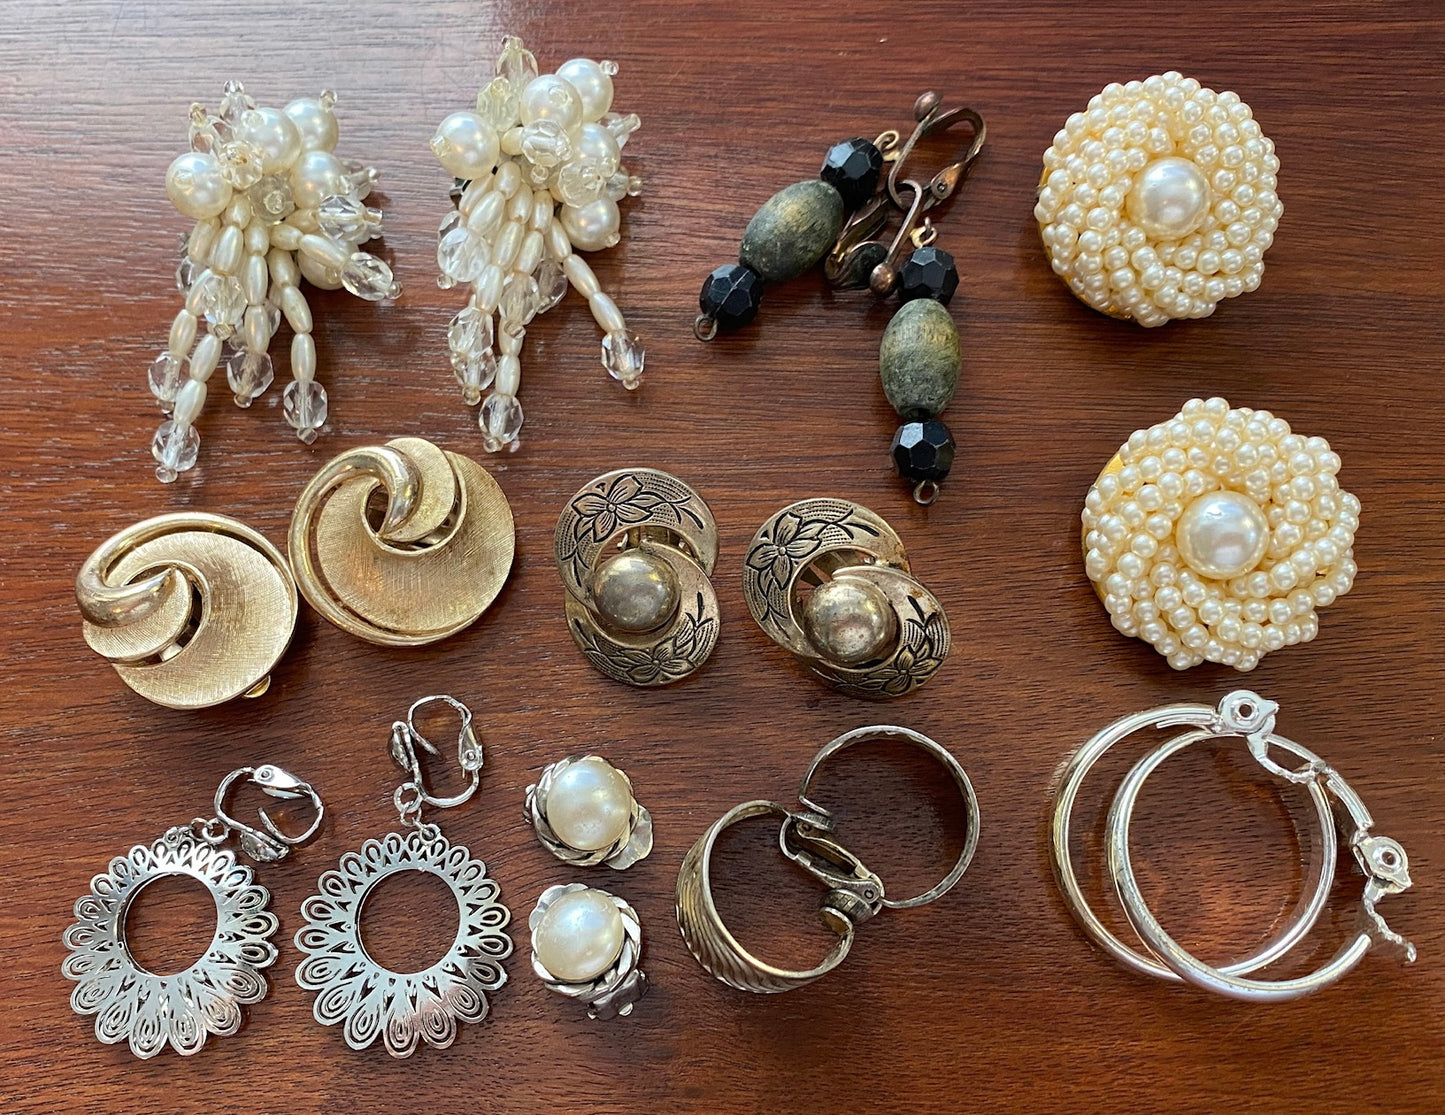 Huge Lot of Vintage Clip on Earrings Faux Pearl Gold Silver Tone Drop Dangly Cluster